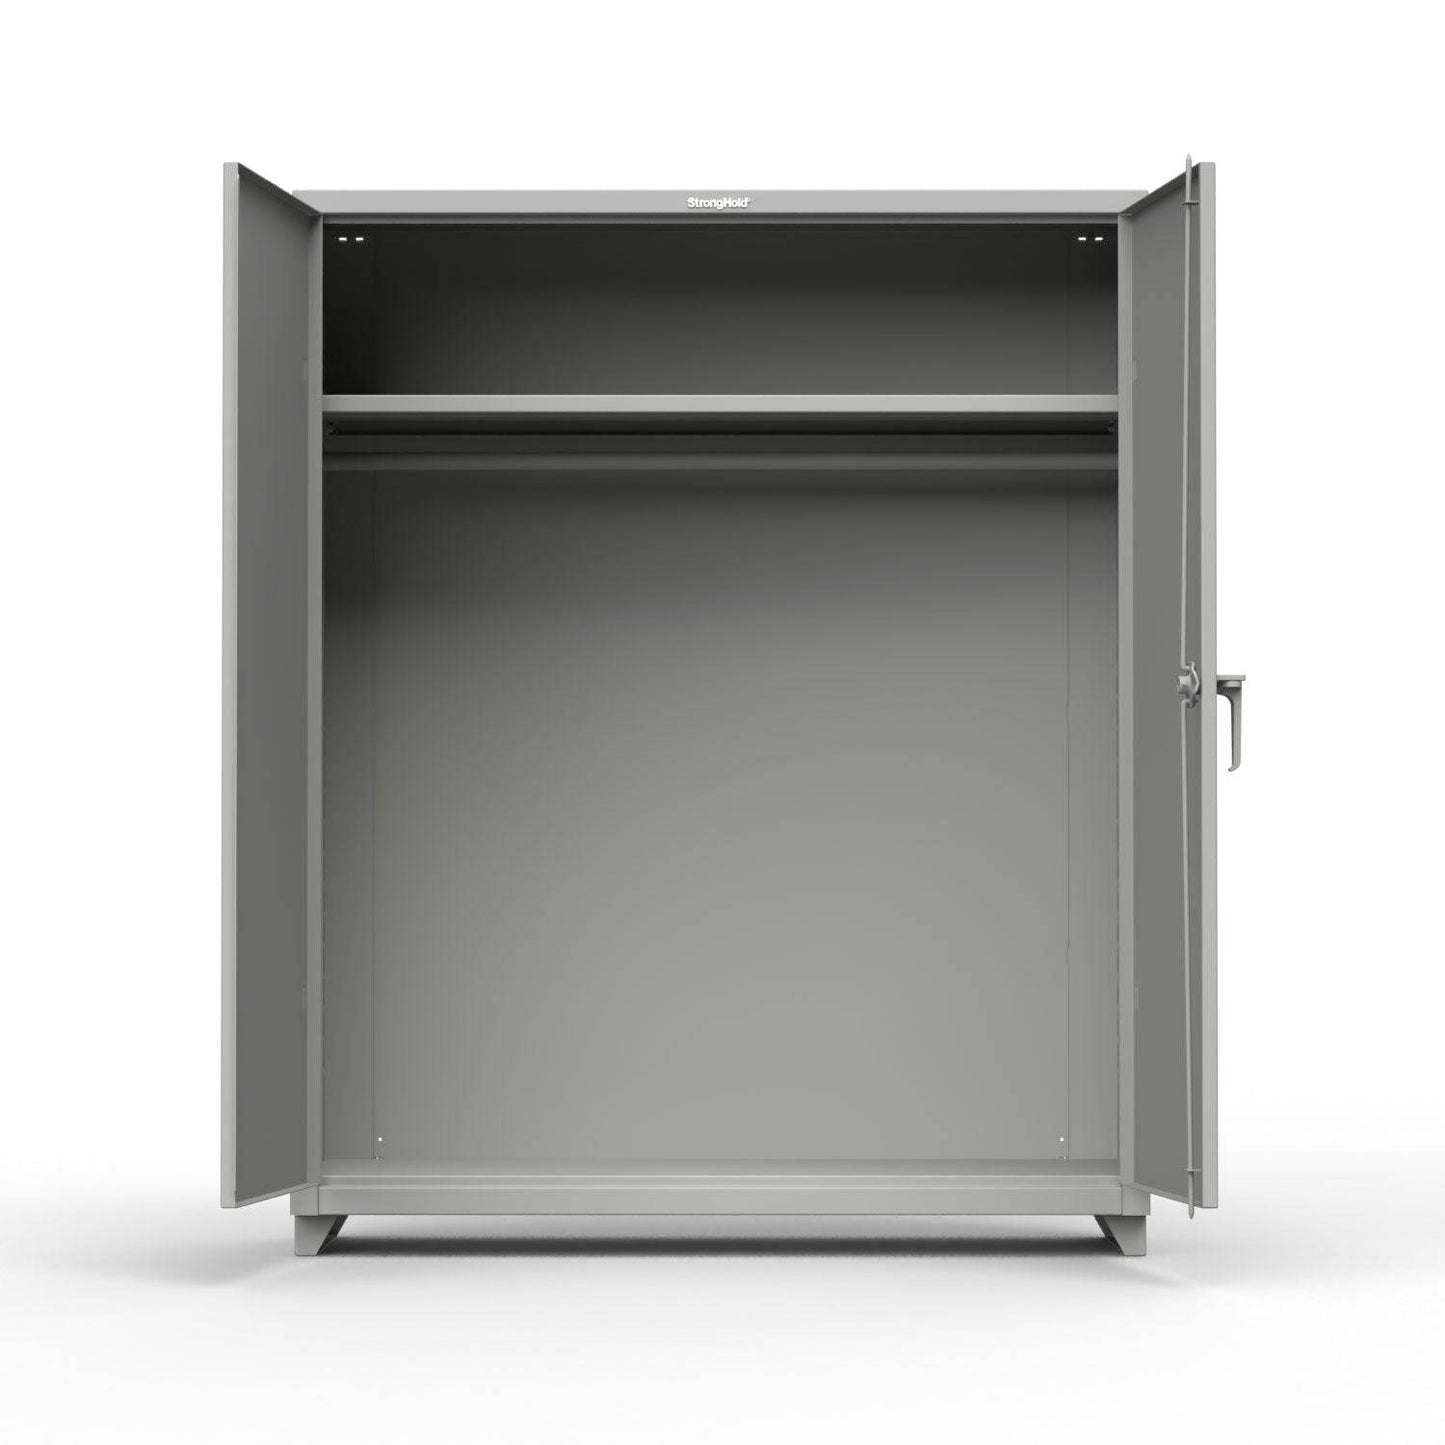 Extra Heavy Duty 14 GA Uniform Cabinet with Hanger Rod, 1 Shelf - 60 In. W x 24 In. D x 75 In. H - Strong Hold